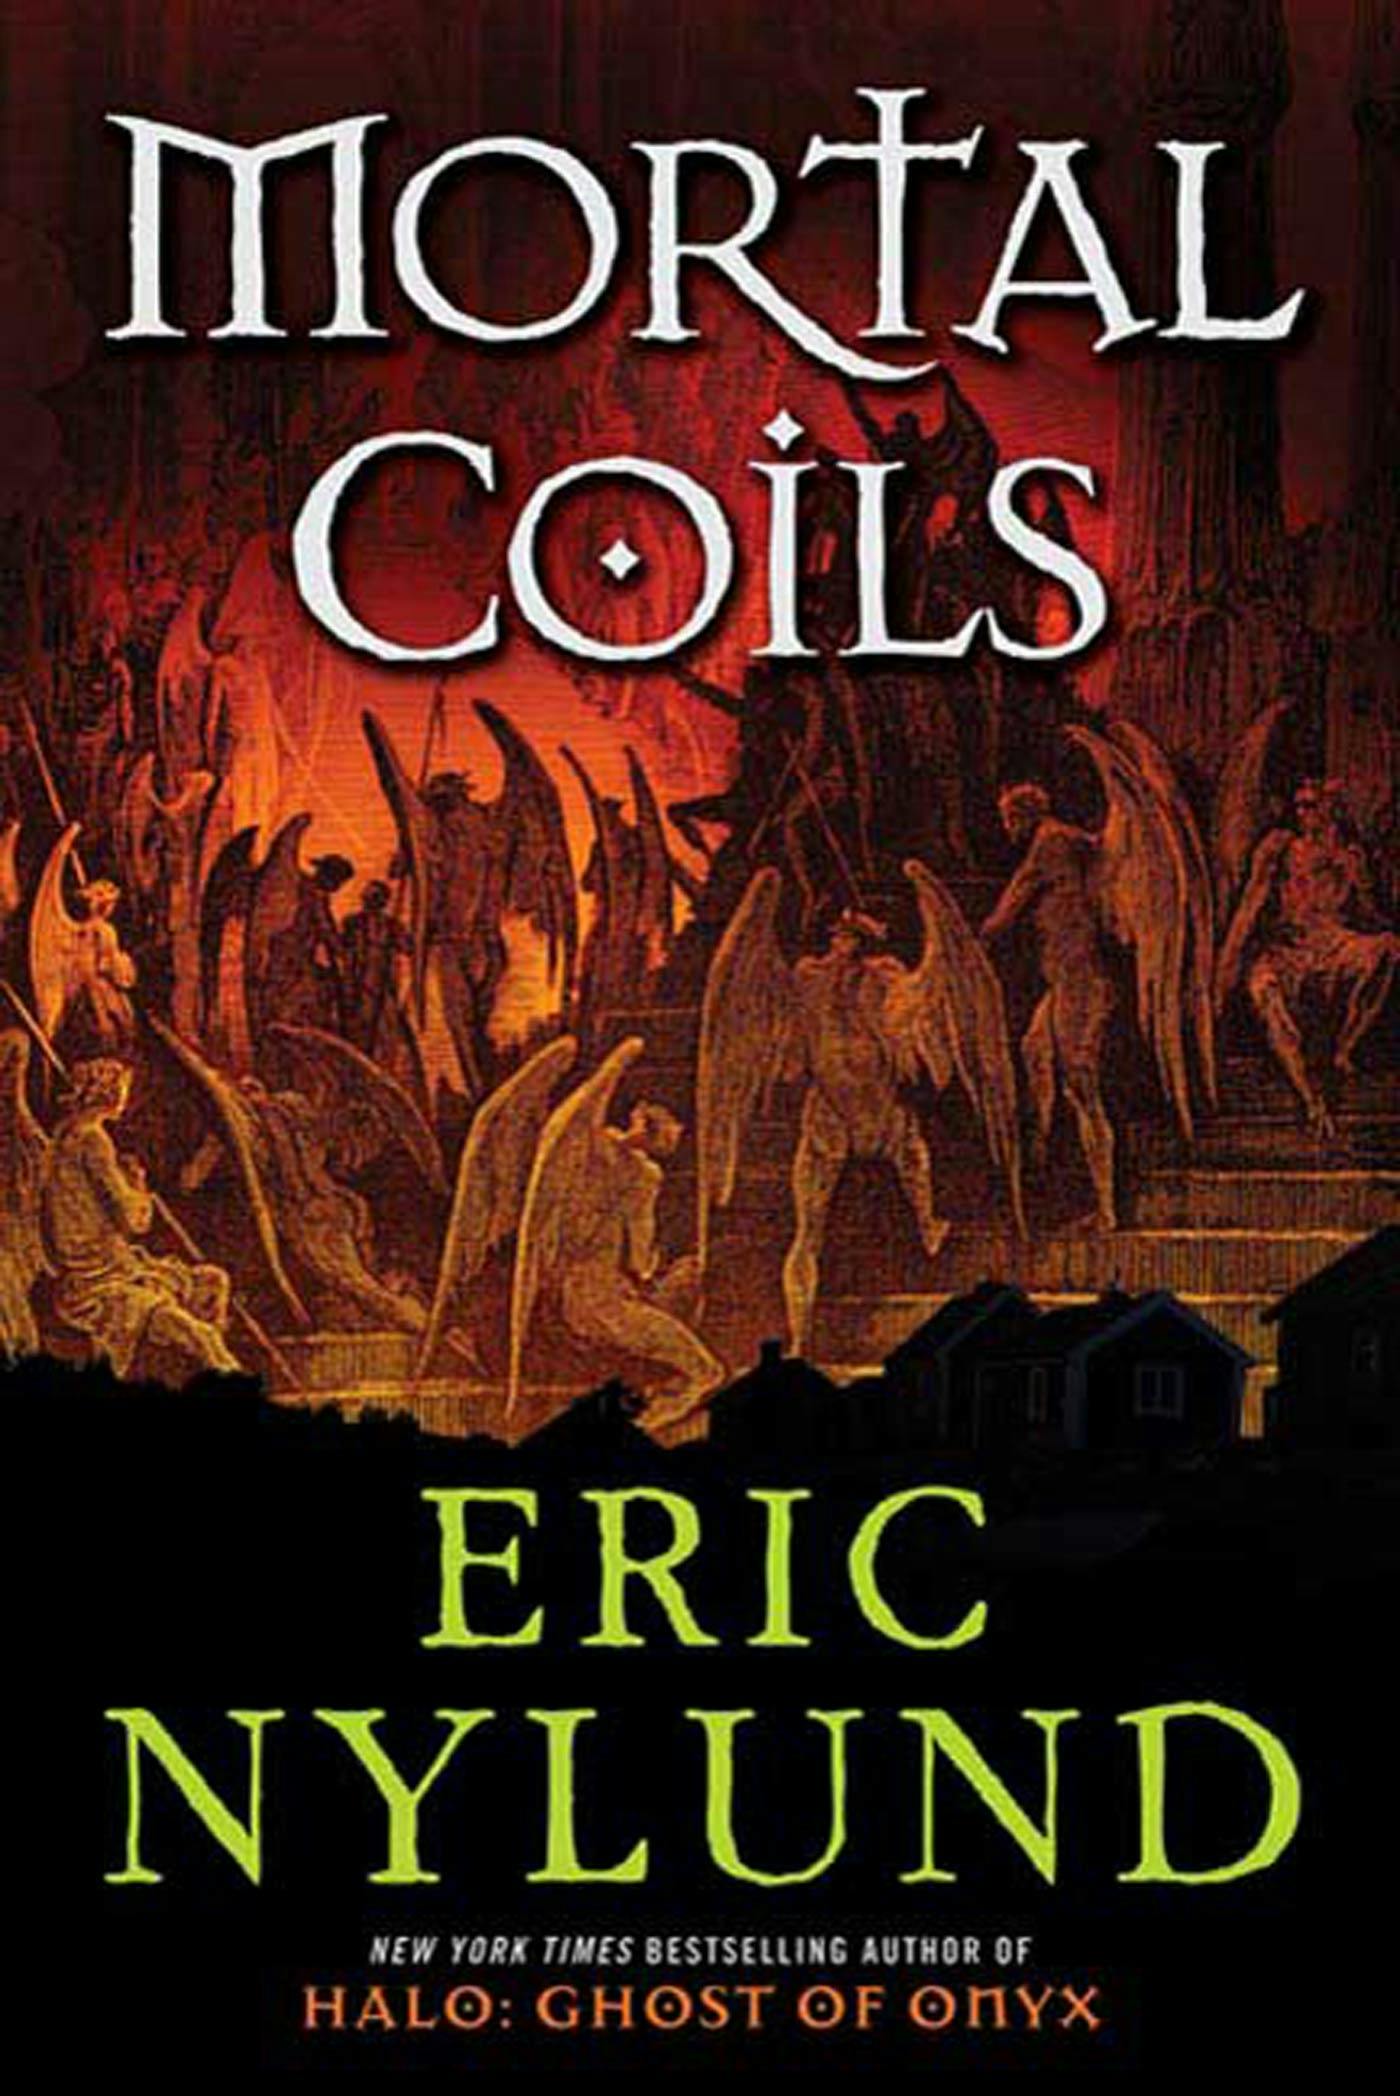 Cover for the book titled as: Mortal Coils